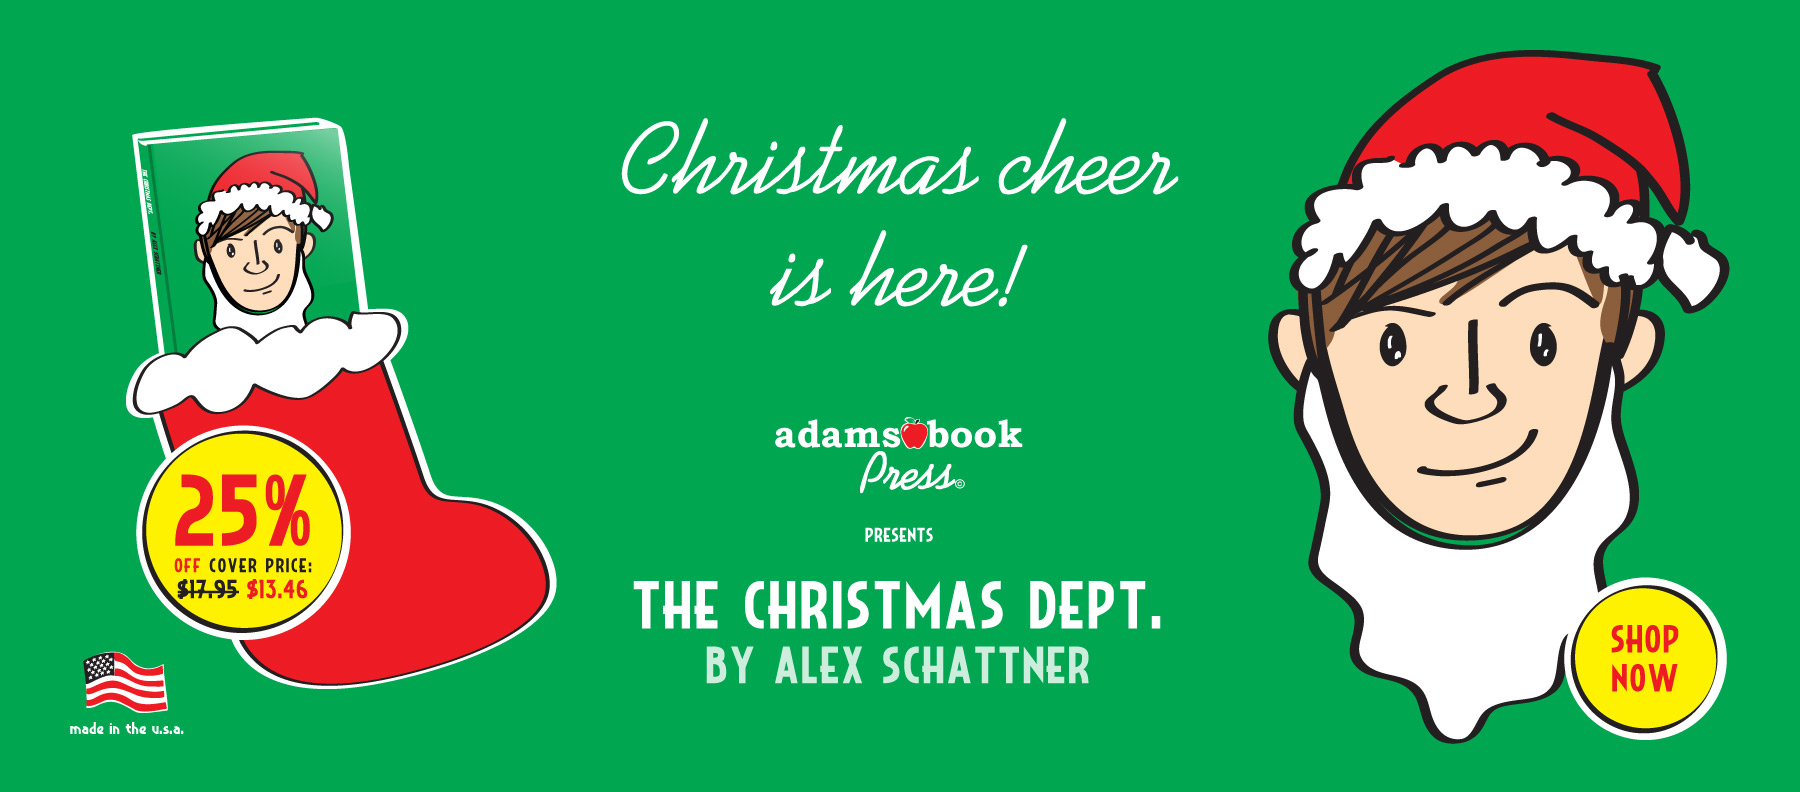 Christmas cheer is here! Adams Book Press presents The Christmas Department